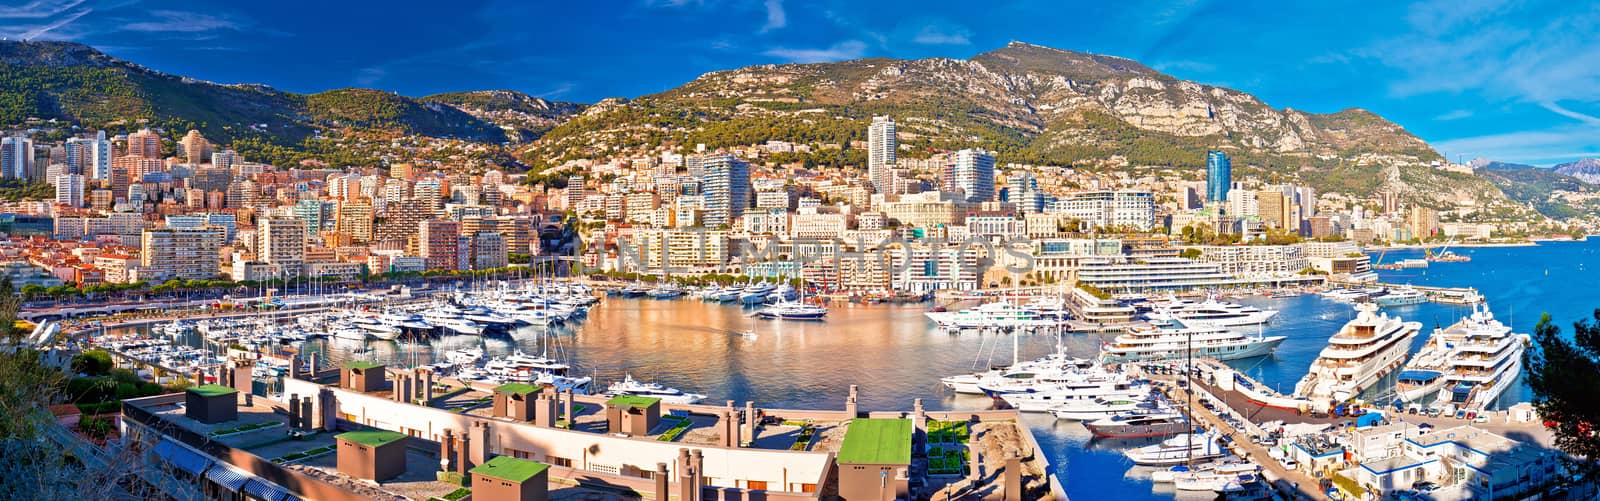 Monaco and Monte Carlo cityscape and harbor colorful panoramic v by xbrchx